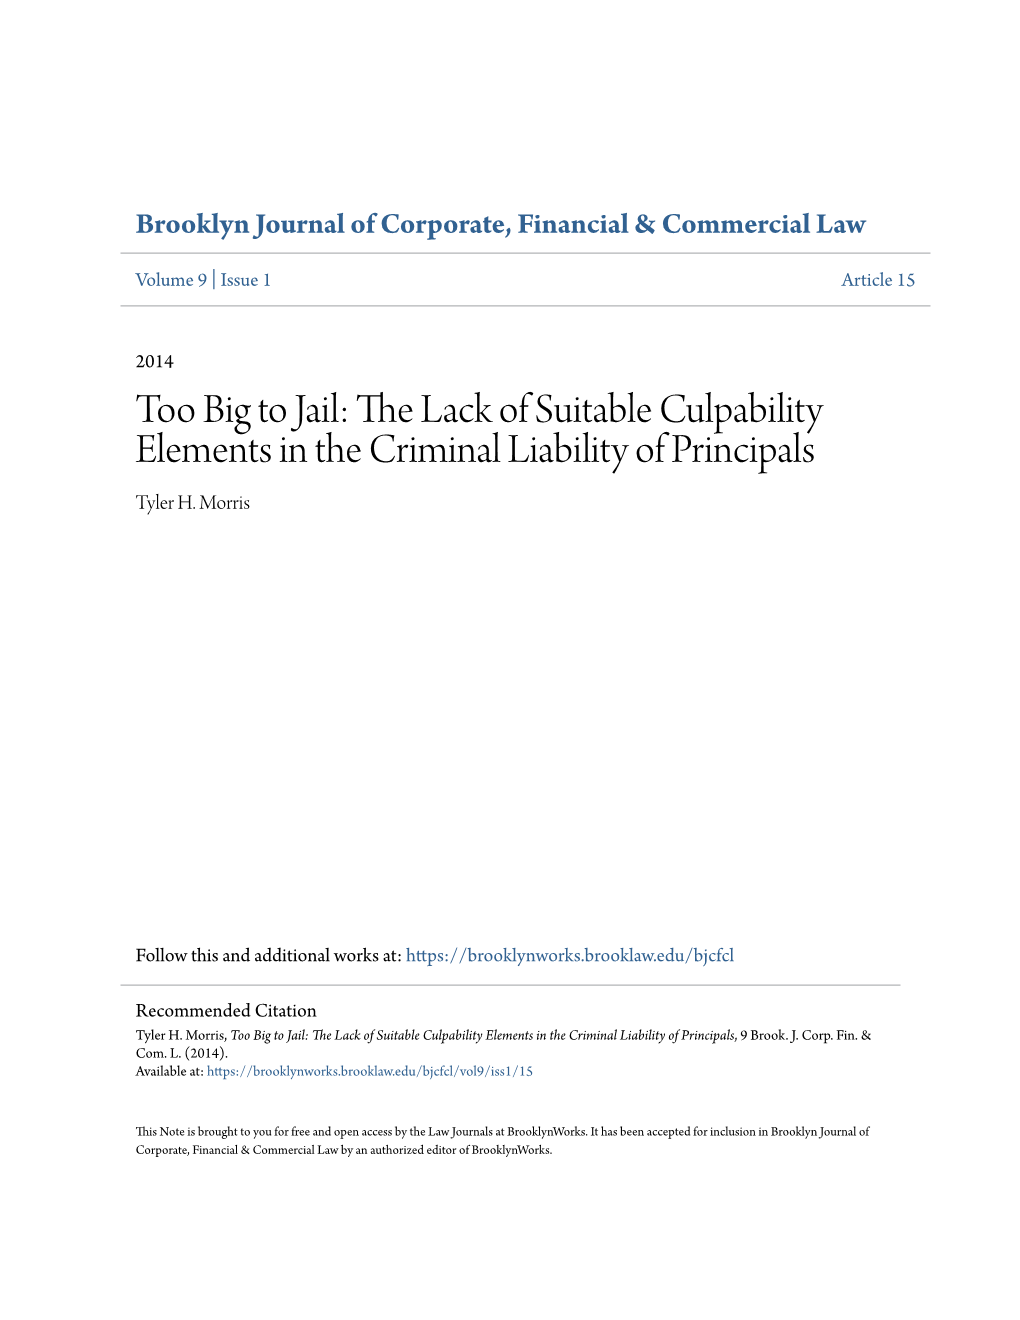 Too Big to Jail: the Lack of Suitable Culpability Elements in the Criminal Liability of Principals Tyler H